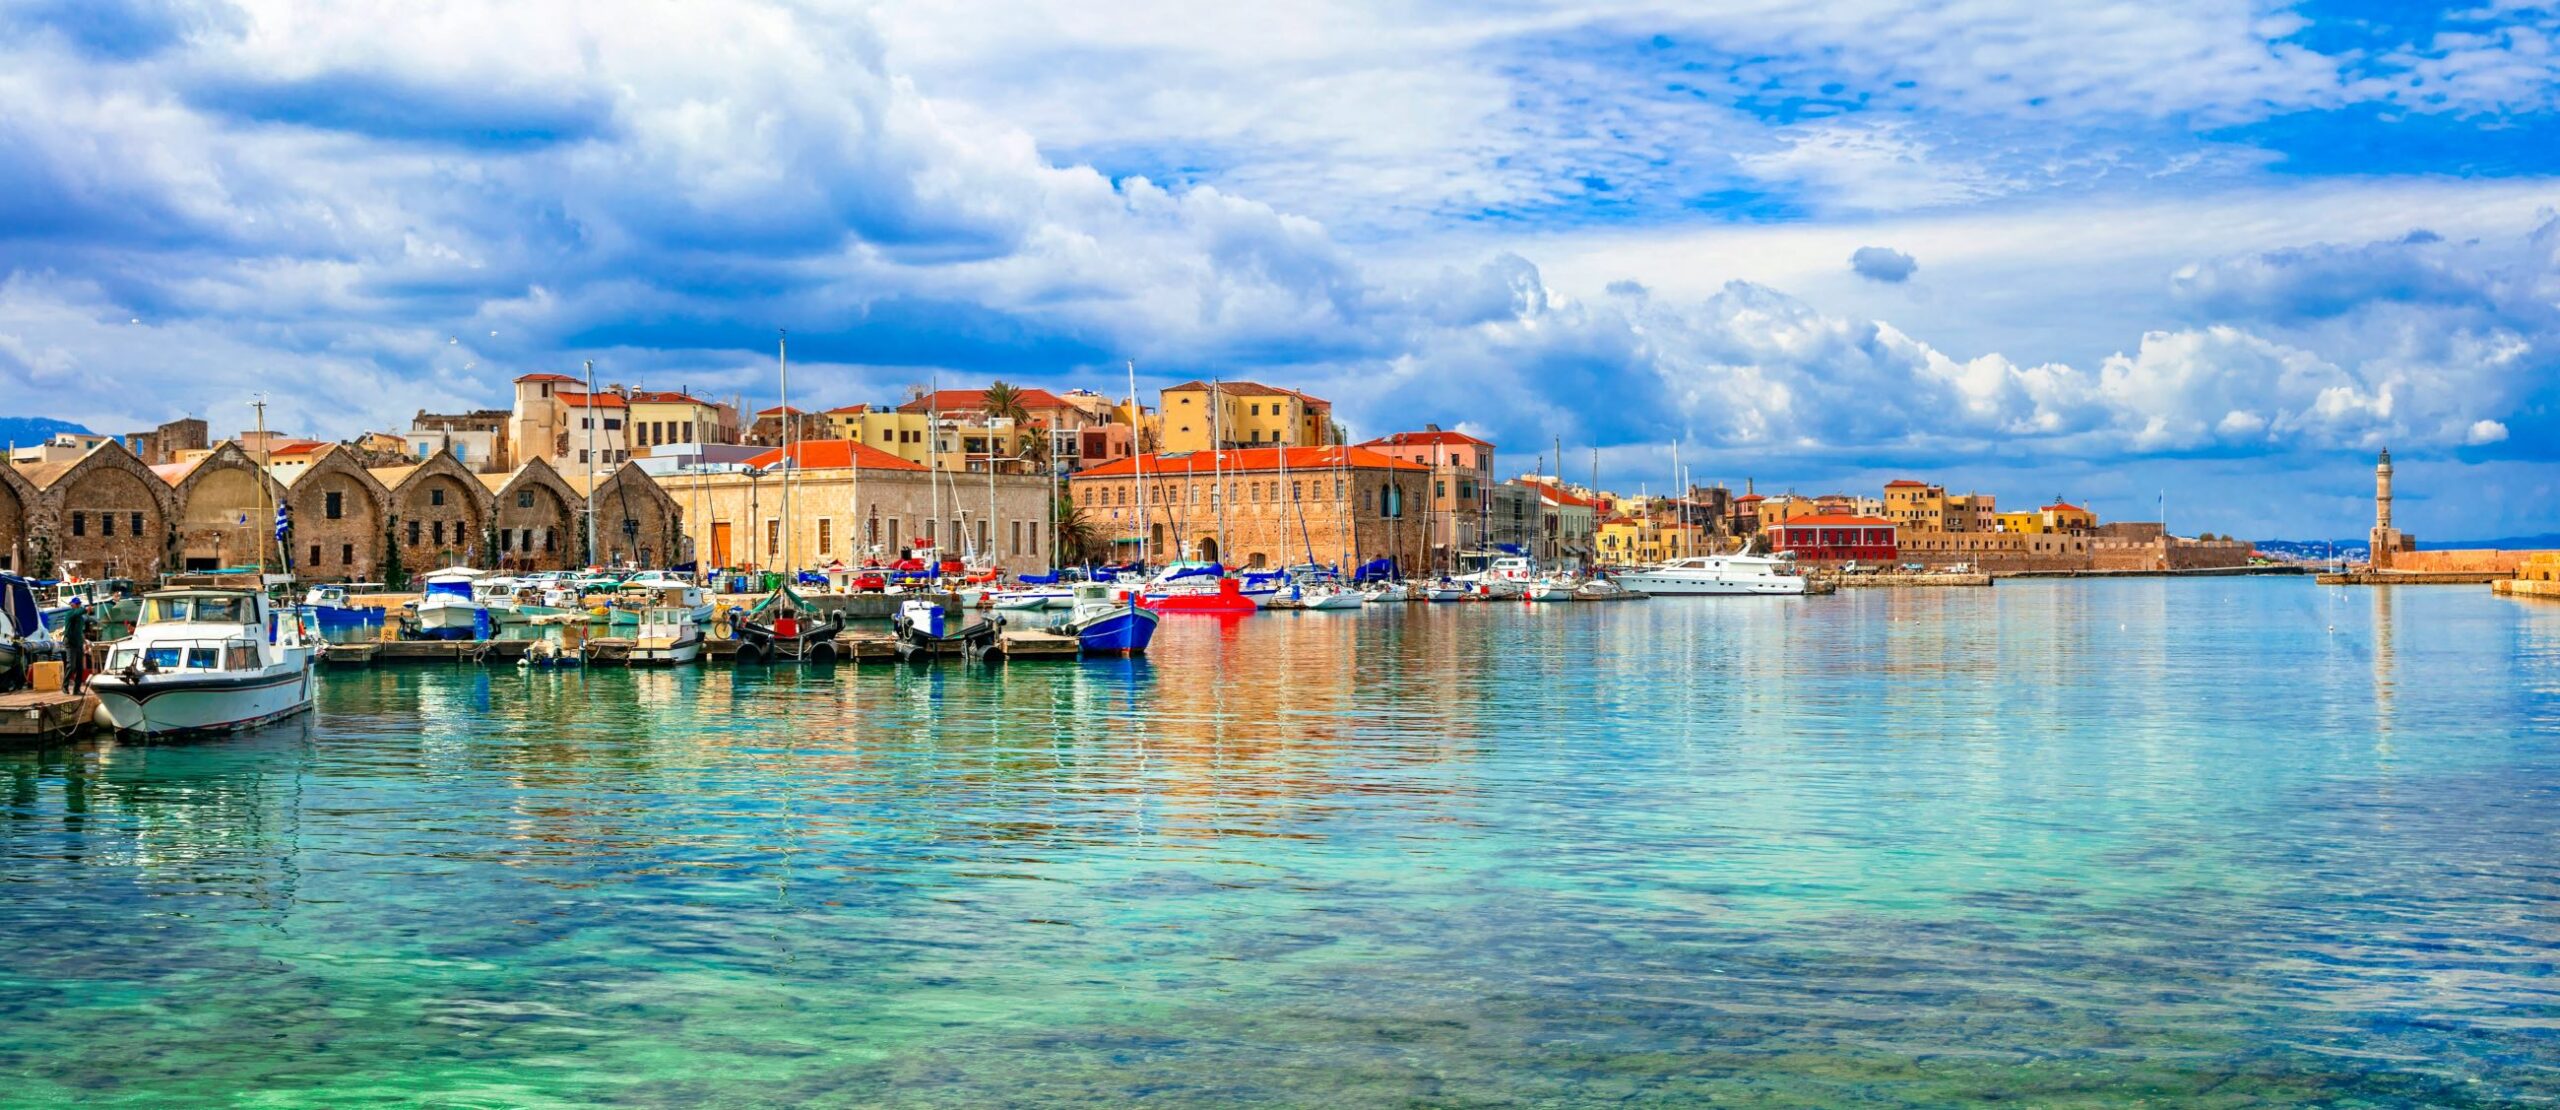 5-Reasons-to-Fall-in-Love-with-the-Greek-Island-of-Crete